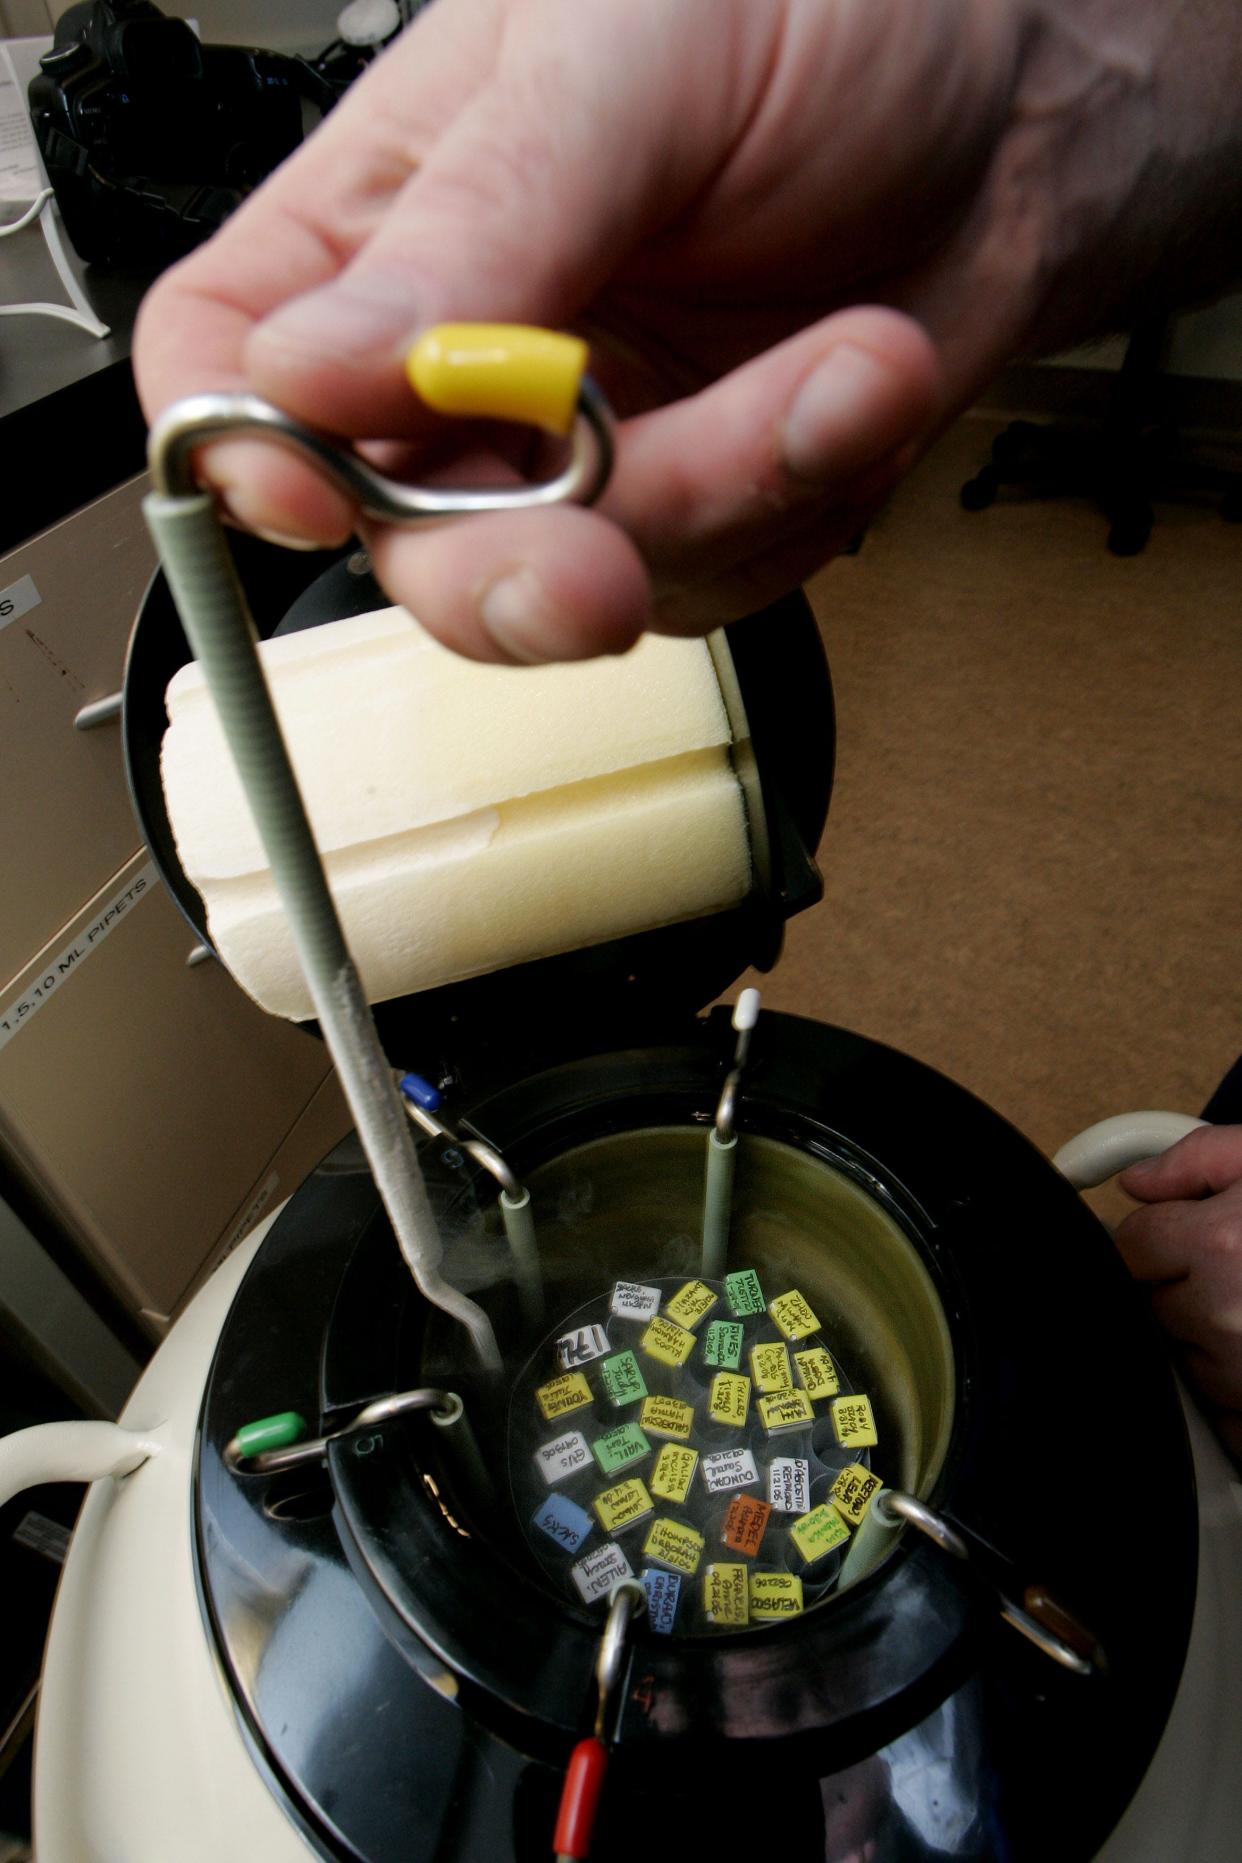 Embryologist Ric Ross pulls out vials of human embryos from a liquid nitrogen storage container at the La Jolla IVF Clinic in 2007. The clinic accepts donated embryos from around the country through The Stem Cell resource, which are then given to stem cell research labs for research.